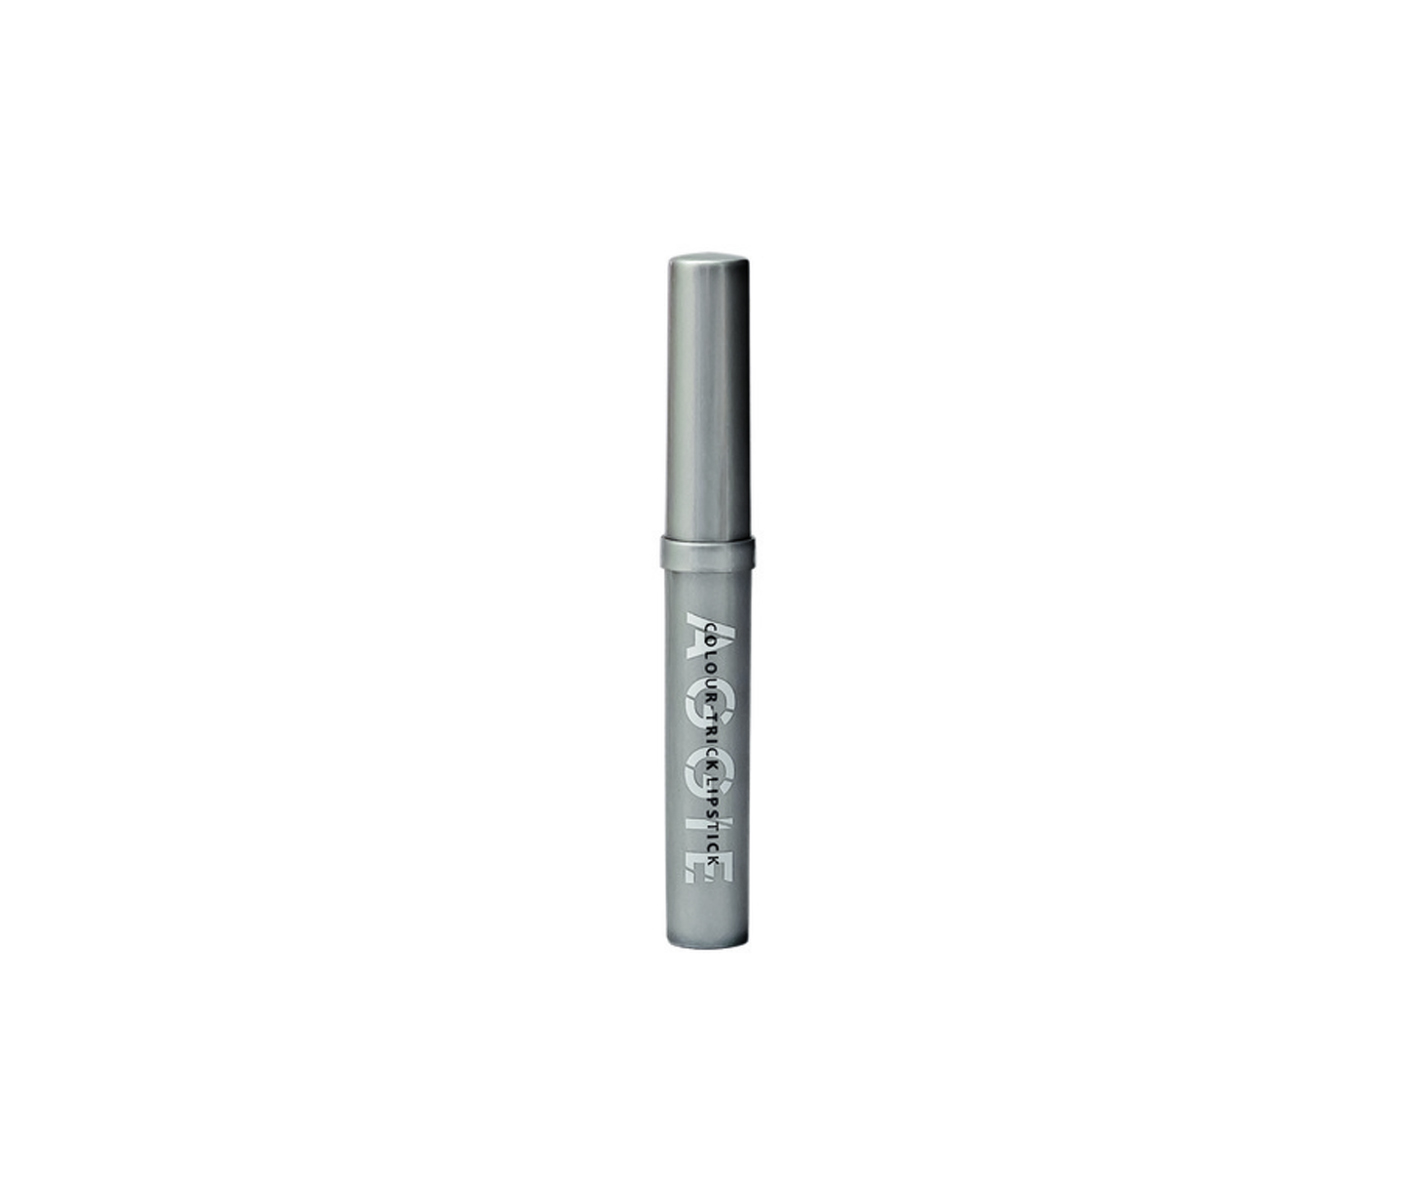 Aggie, Colour-Changing Lipstick with Hyaluronic Acid & Vitamin E